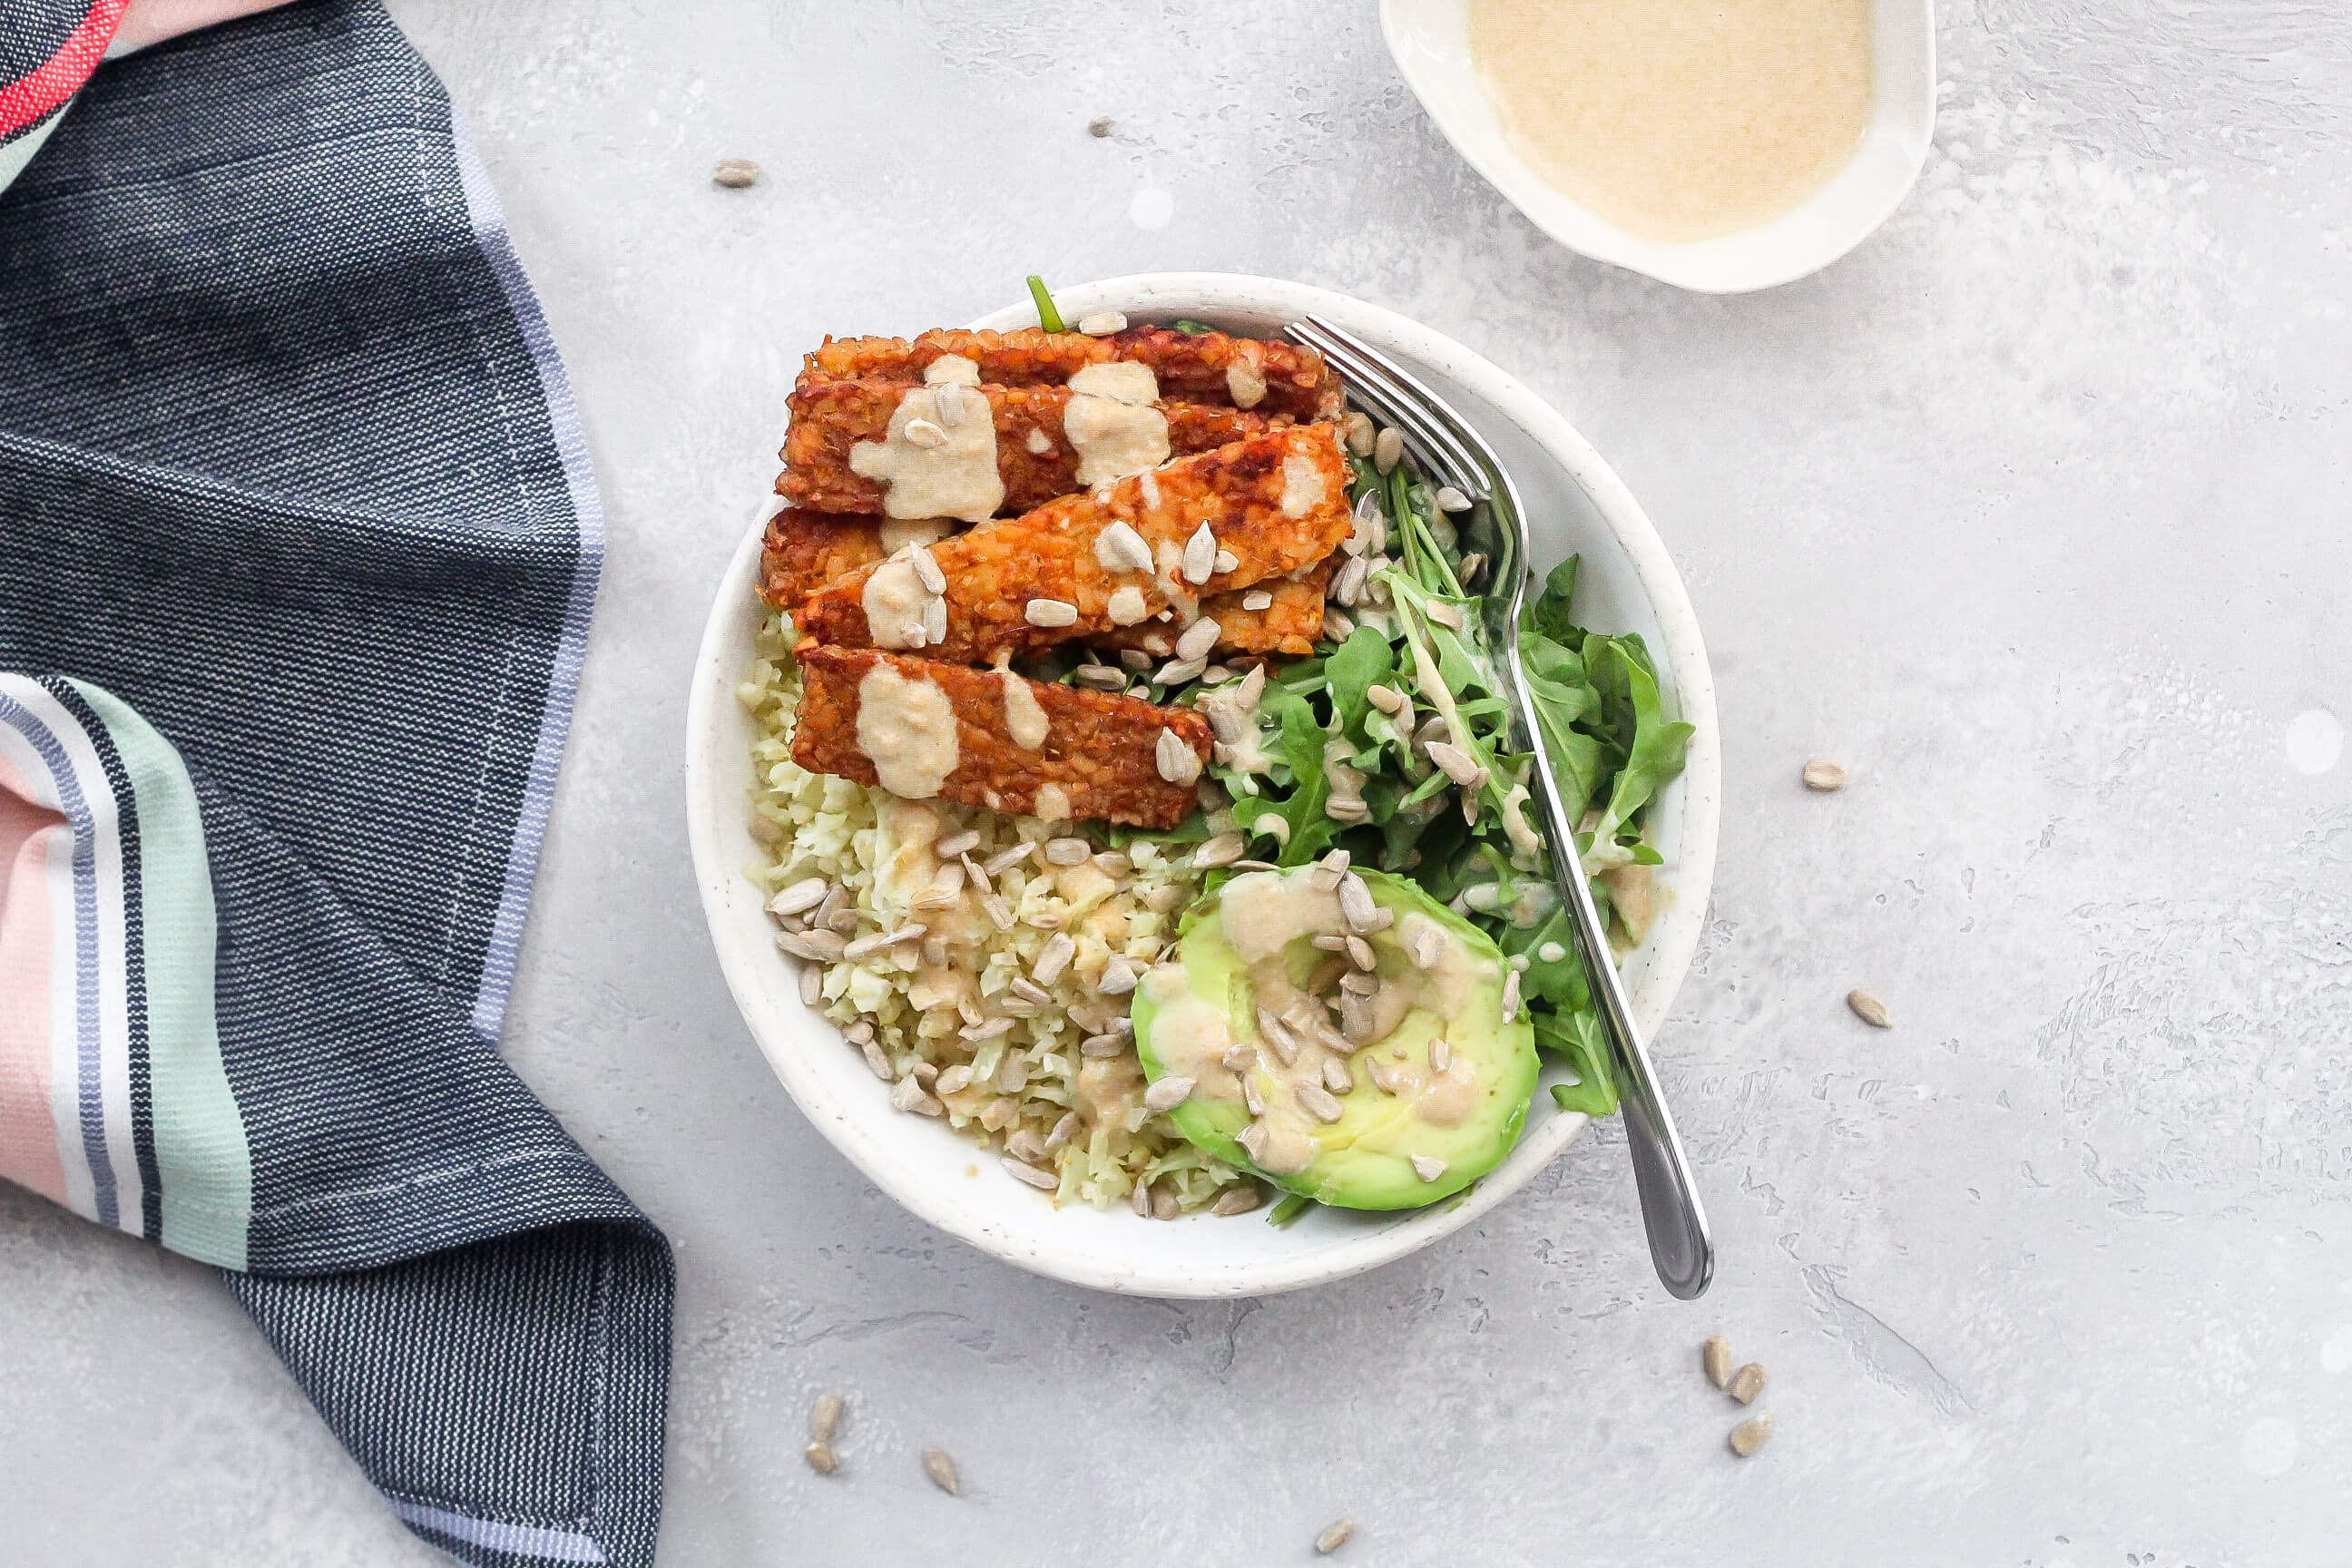 20 High Protein, Plant-Based Meals Your Clients Will Love: Tempeh Buddha Bowl